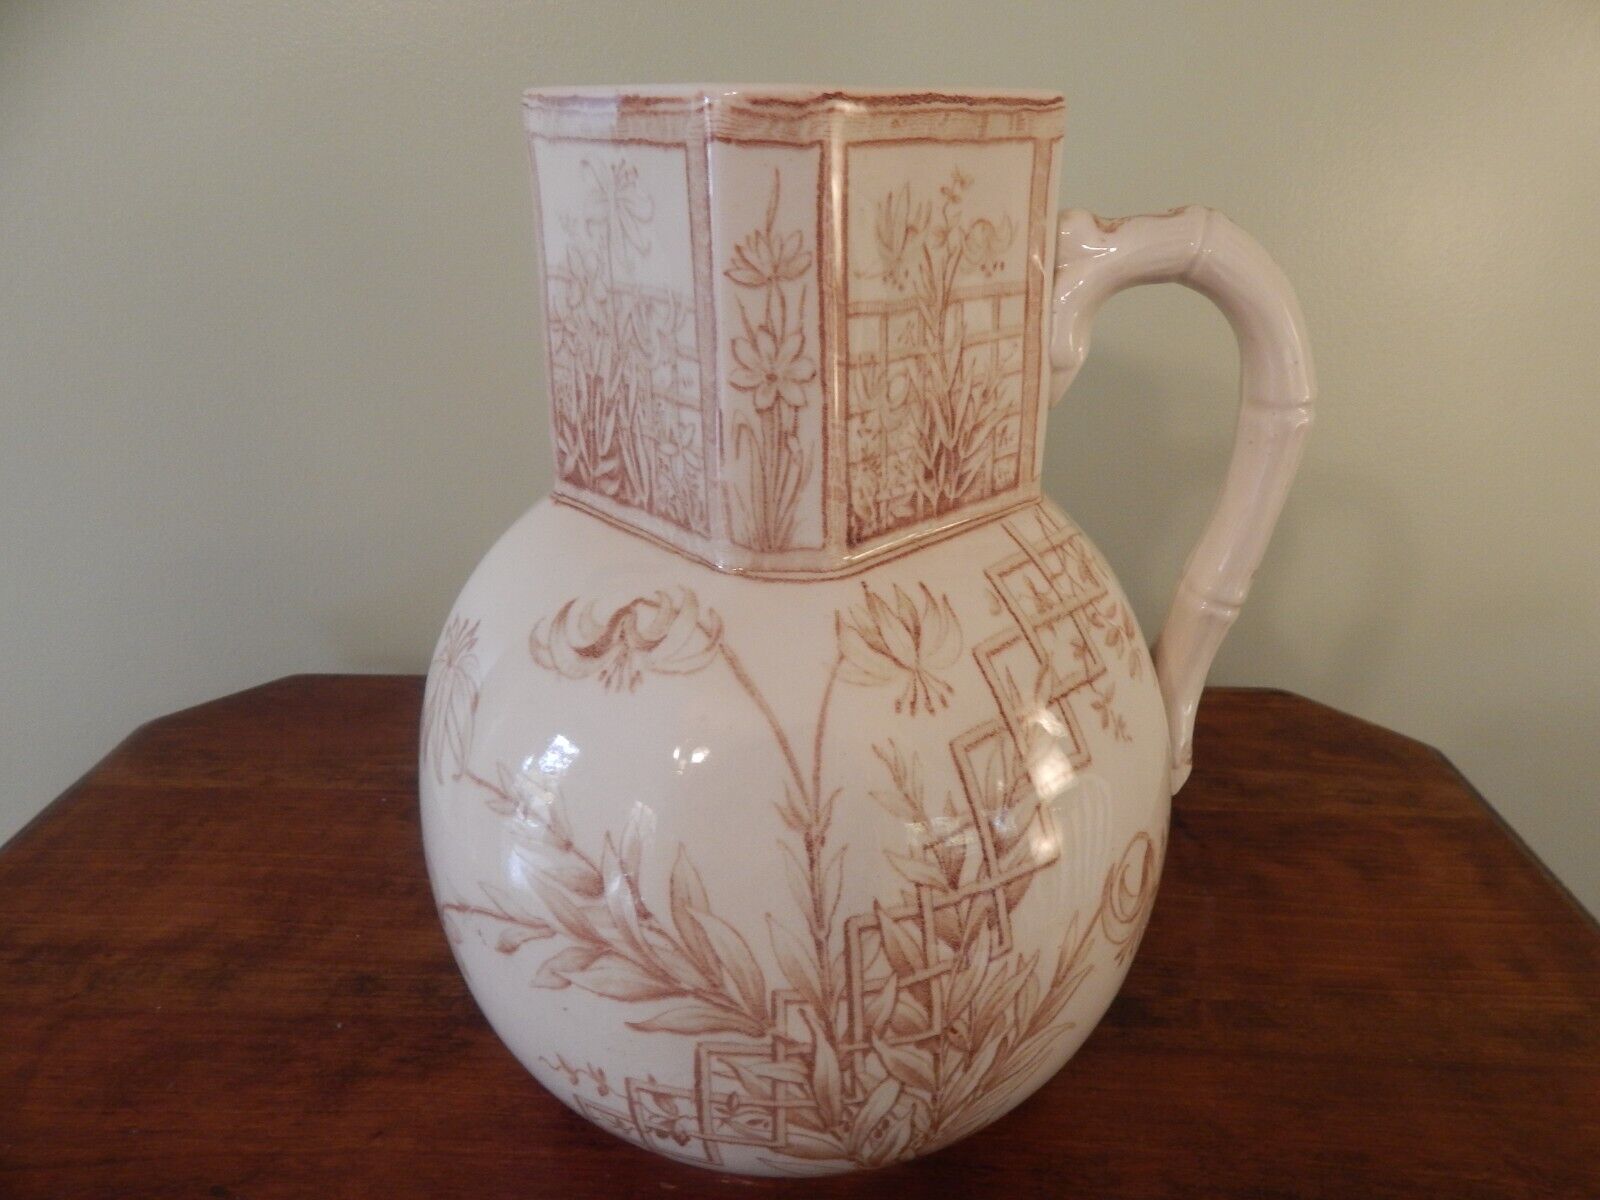 Antique G. W.Turner & Sons Beatrice Pitcher by Tunstall circa 1873-1895